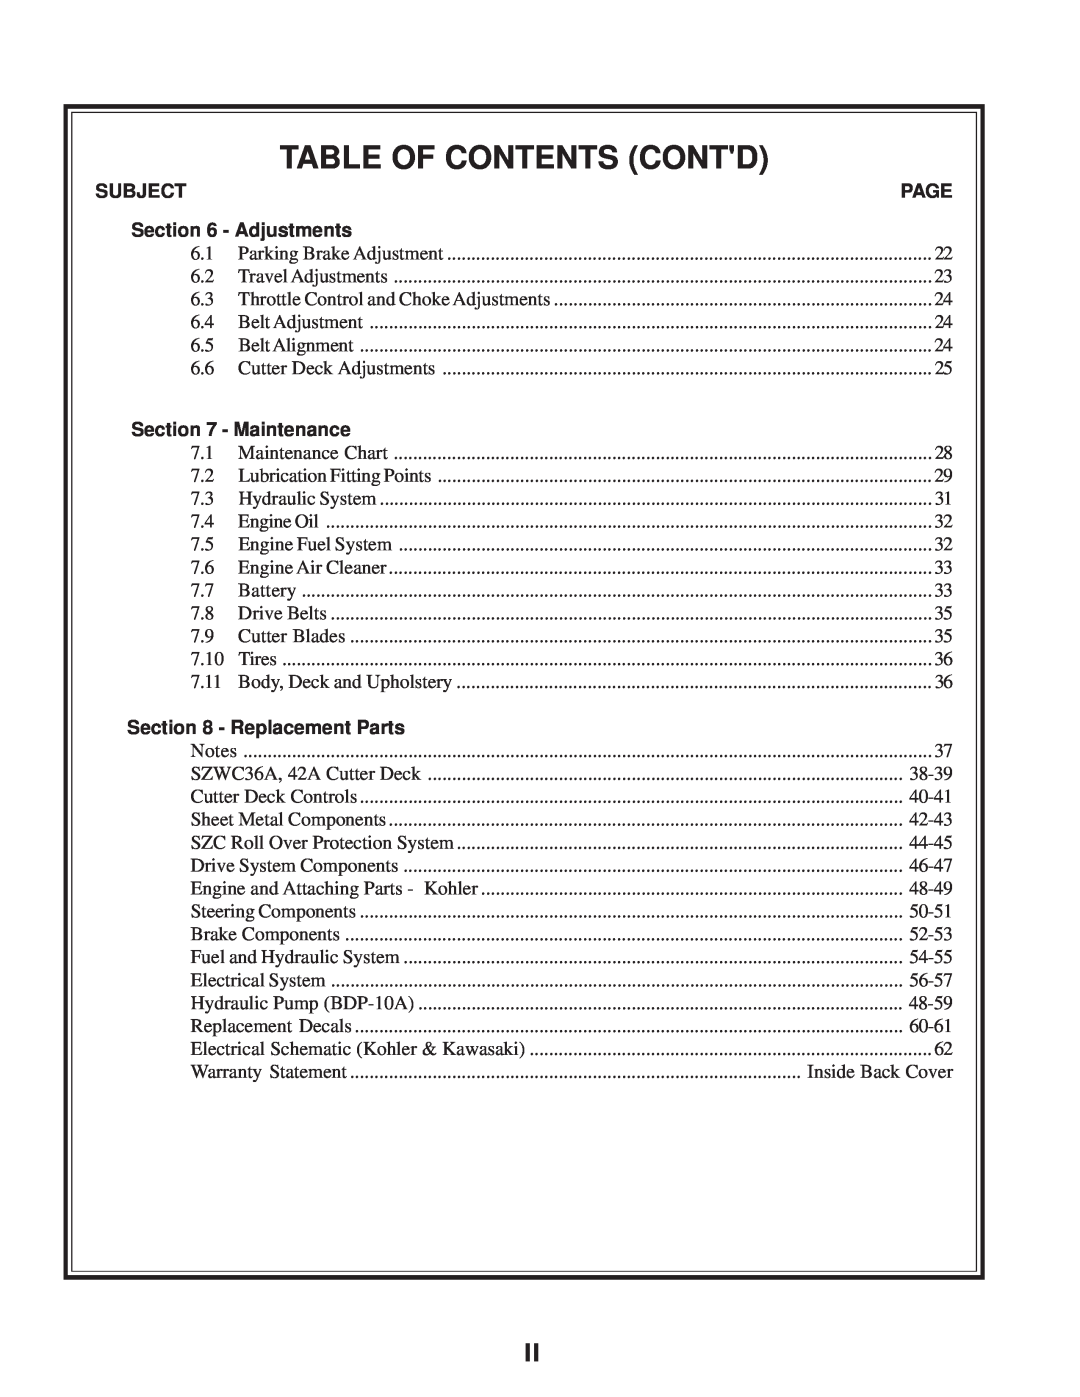 Scag Power Equipment SZC manual Table Of Contents Contd 